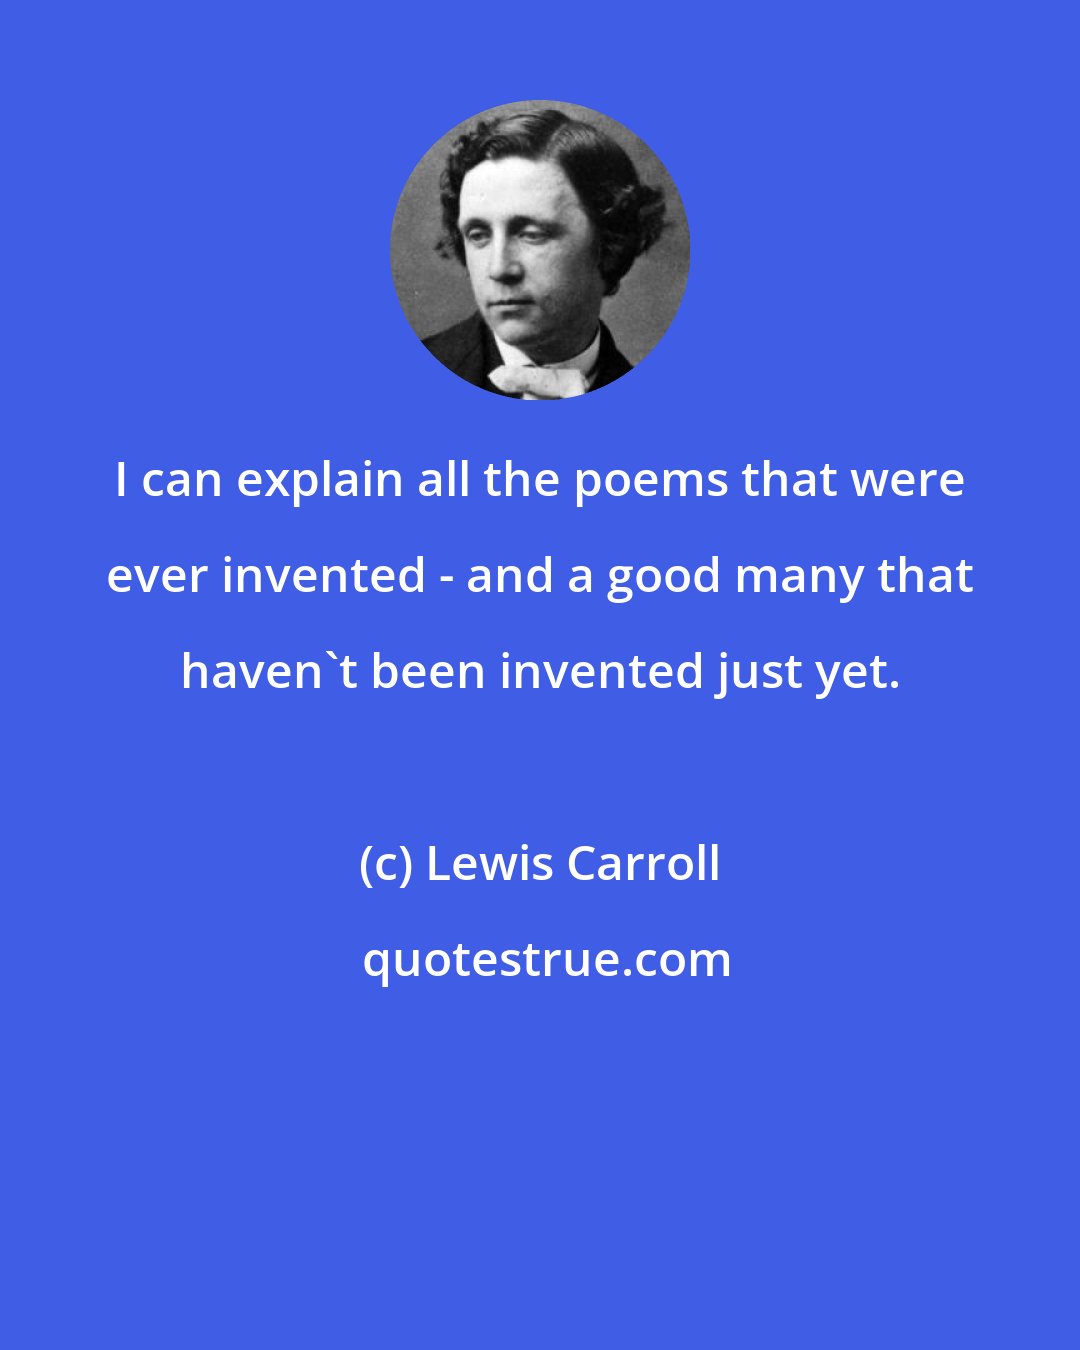 Lewis Carroll: I can explain all the poems that were ever invented - and a good many that haven't been invented just yet.